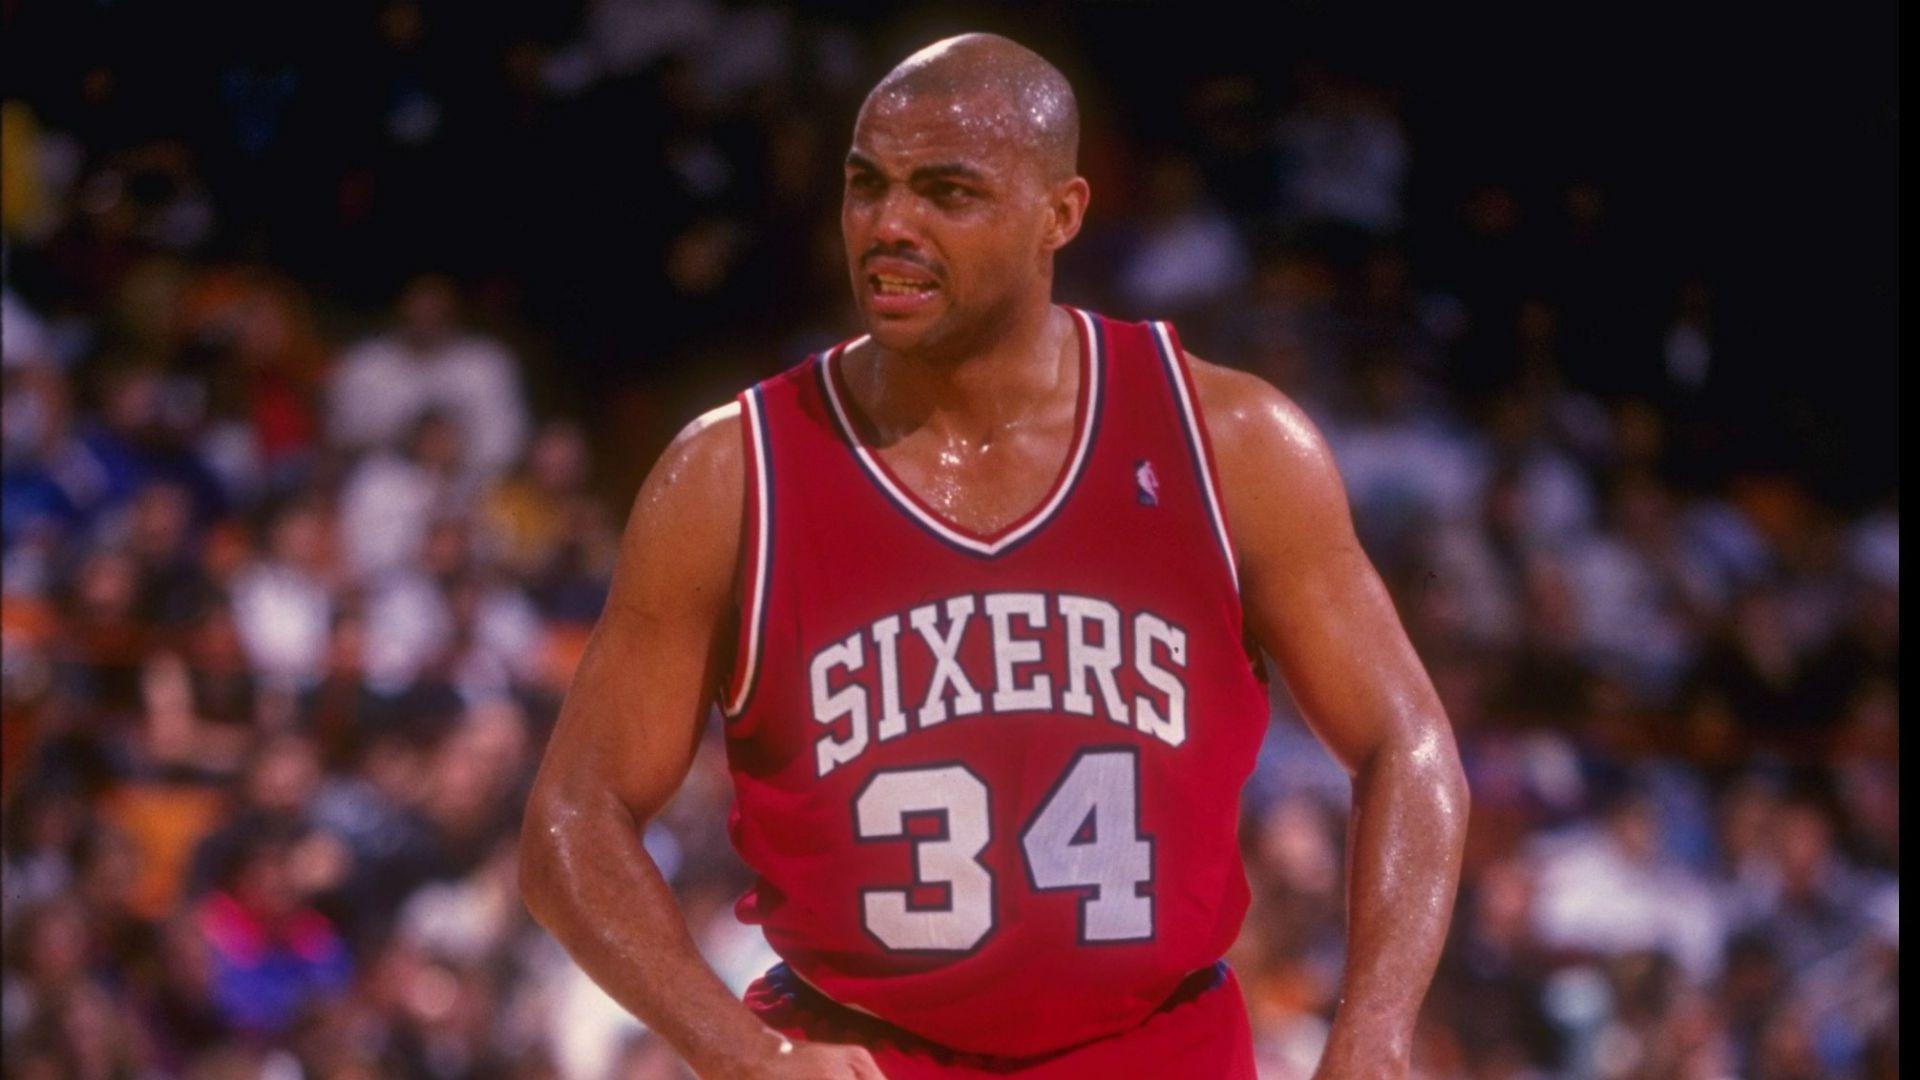 Charles Barkley offers to pay for funeral of kids killed